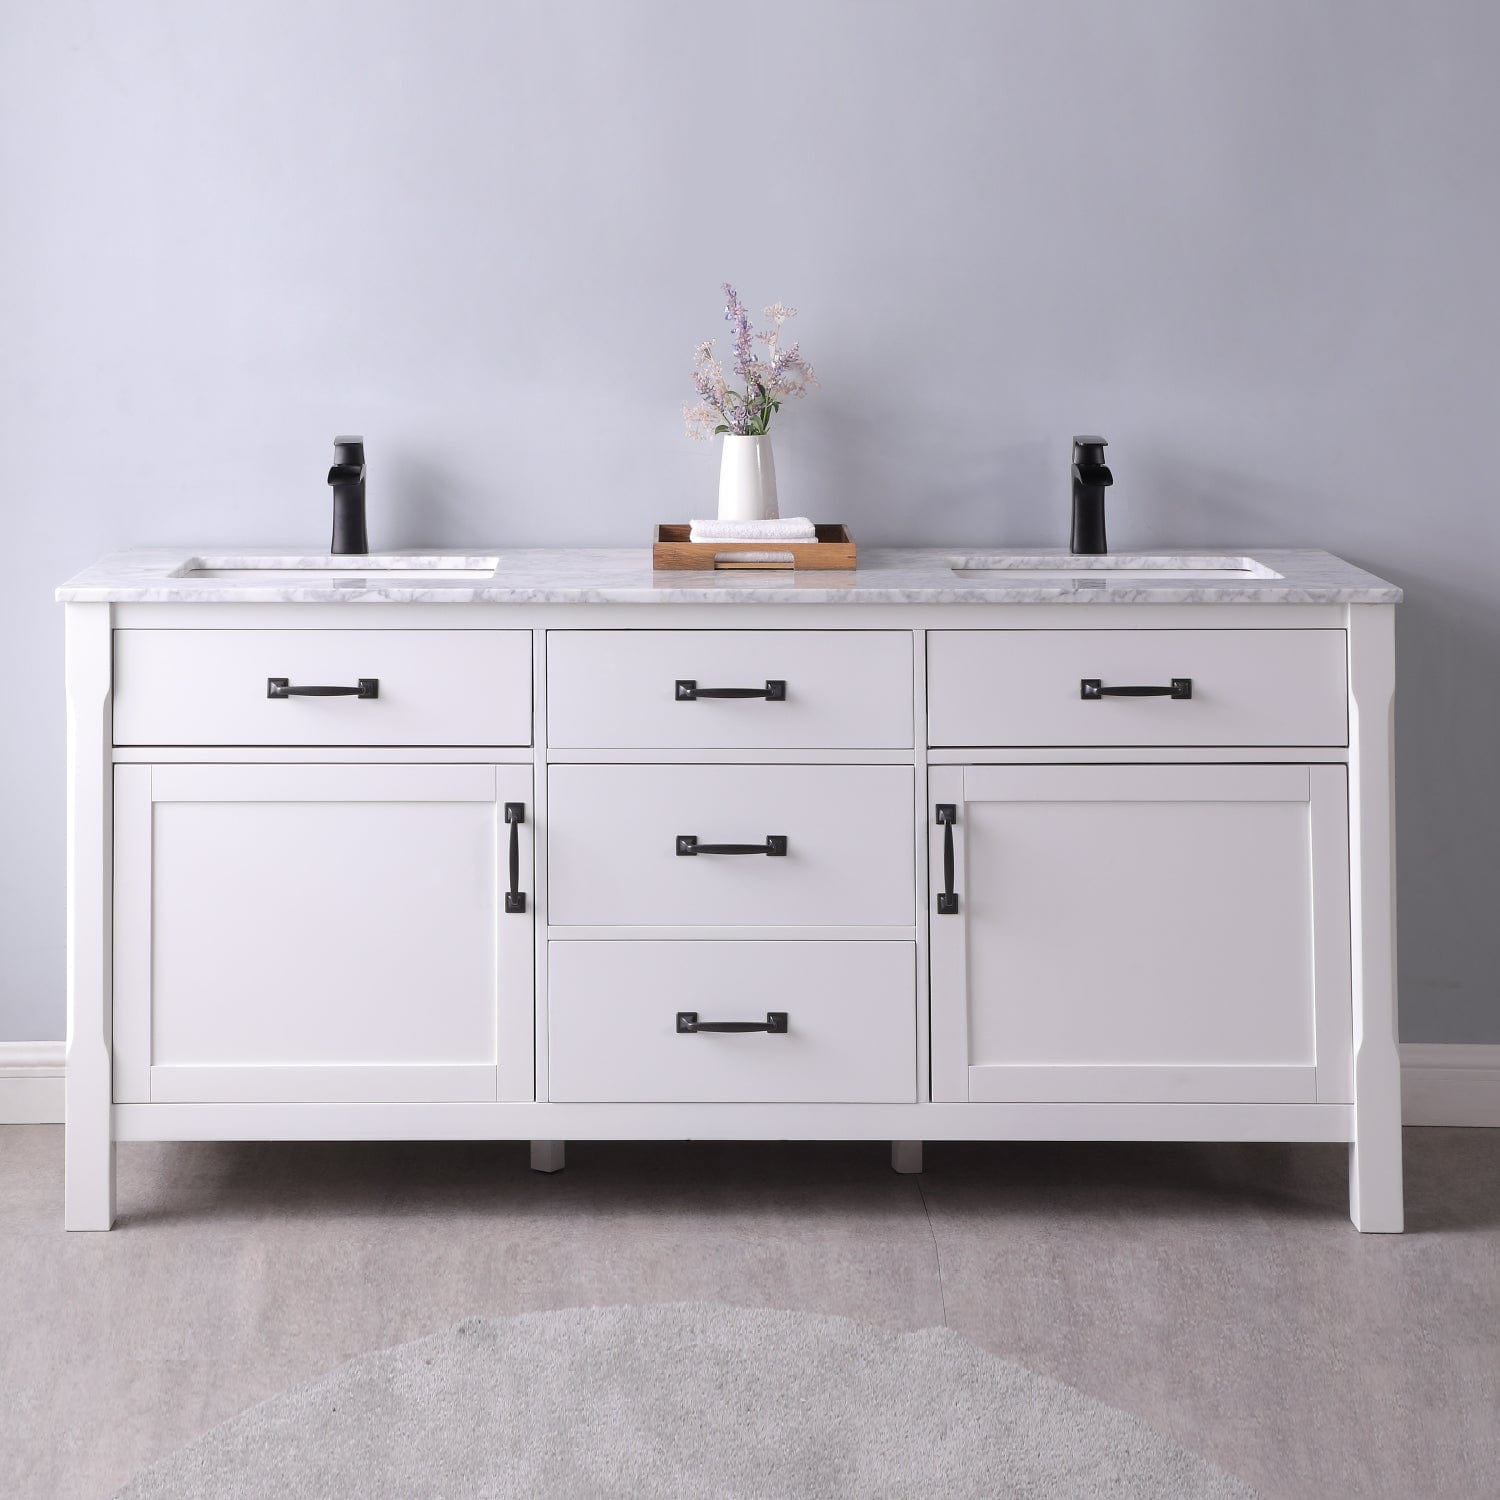 Altair Maribella 72" Double Bathroom Vanity Set in White and Carrara White Marble Countertop without Mirror 535072-WH-CA-NM - Molaix631112970426Vanity535072-WH-CA-NM